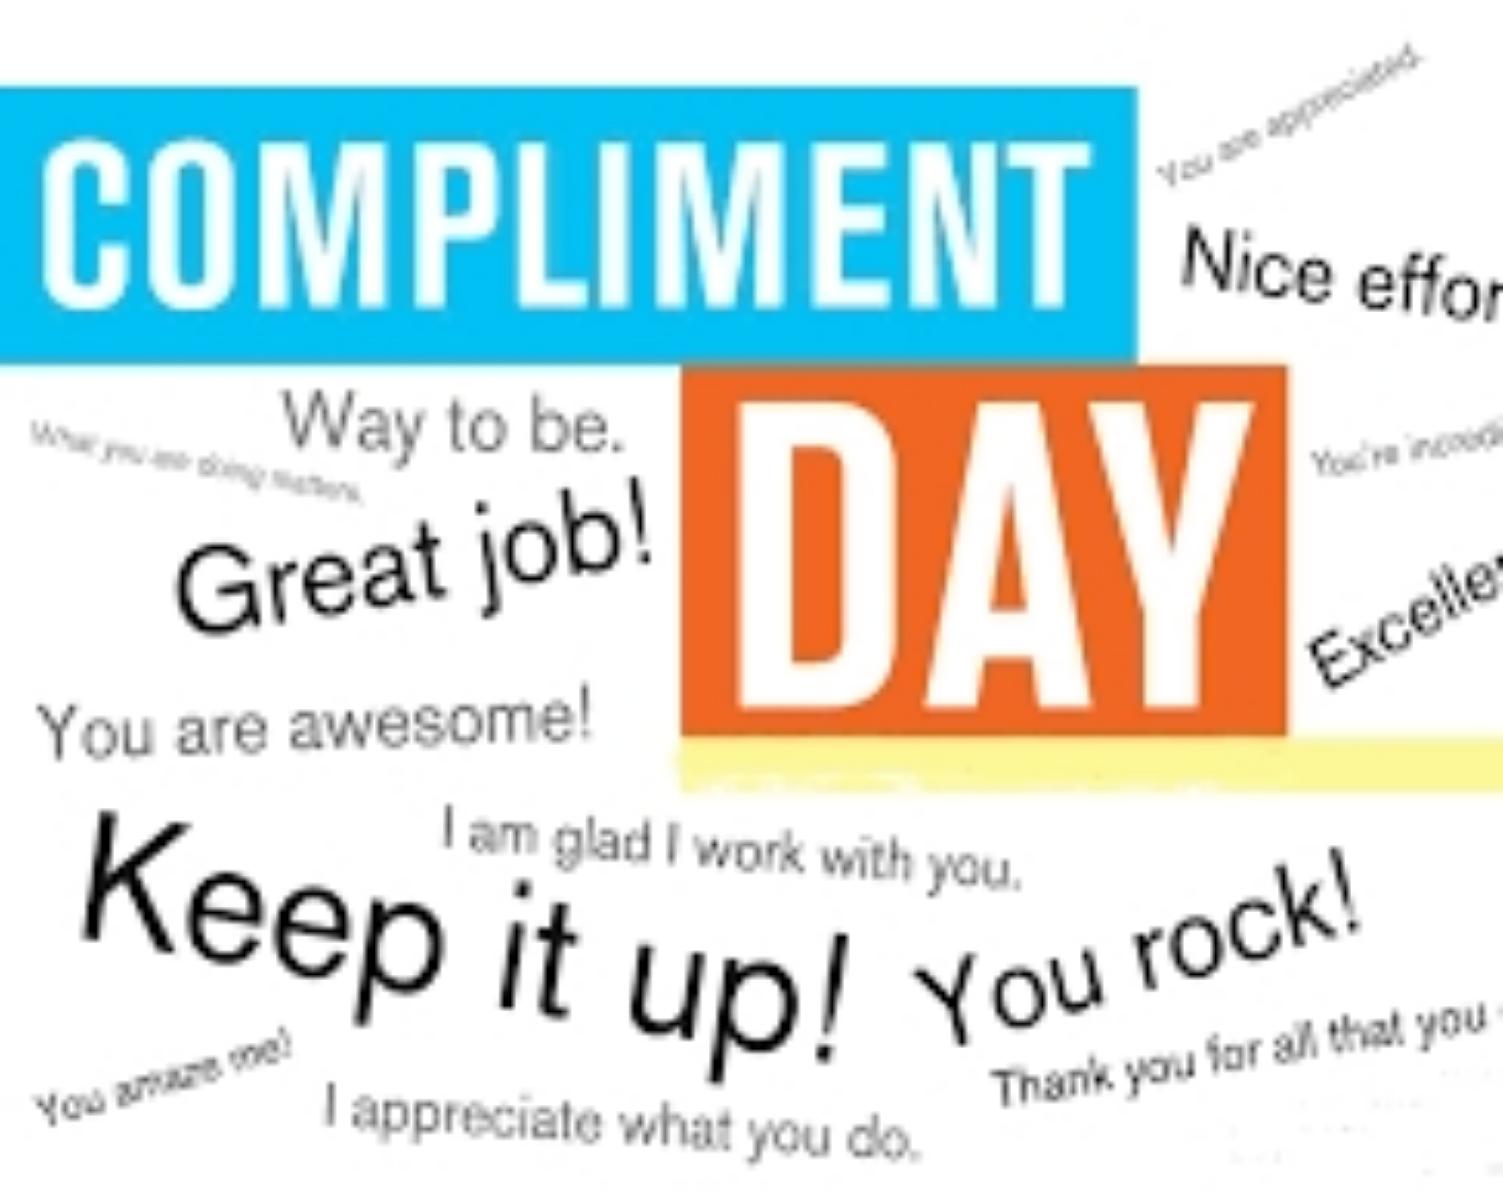 6. Give a compliment